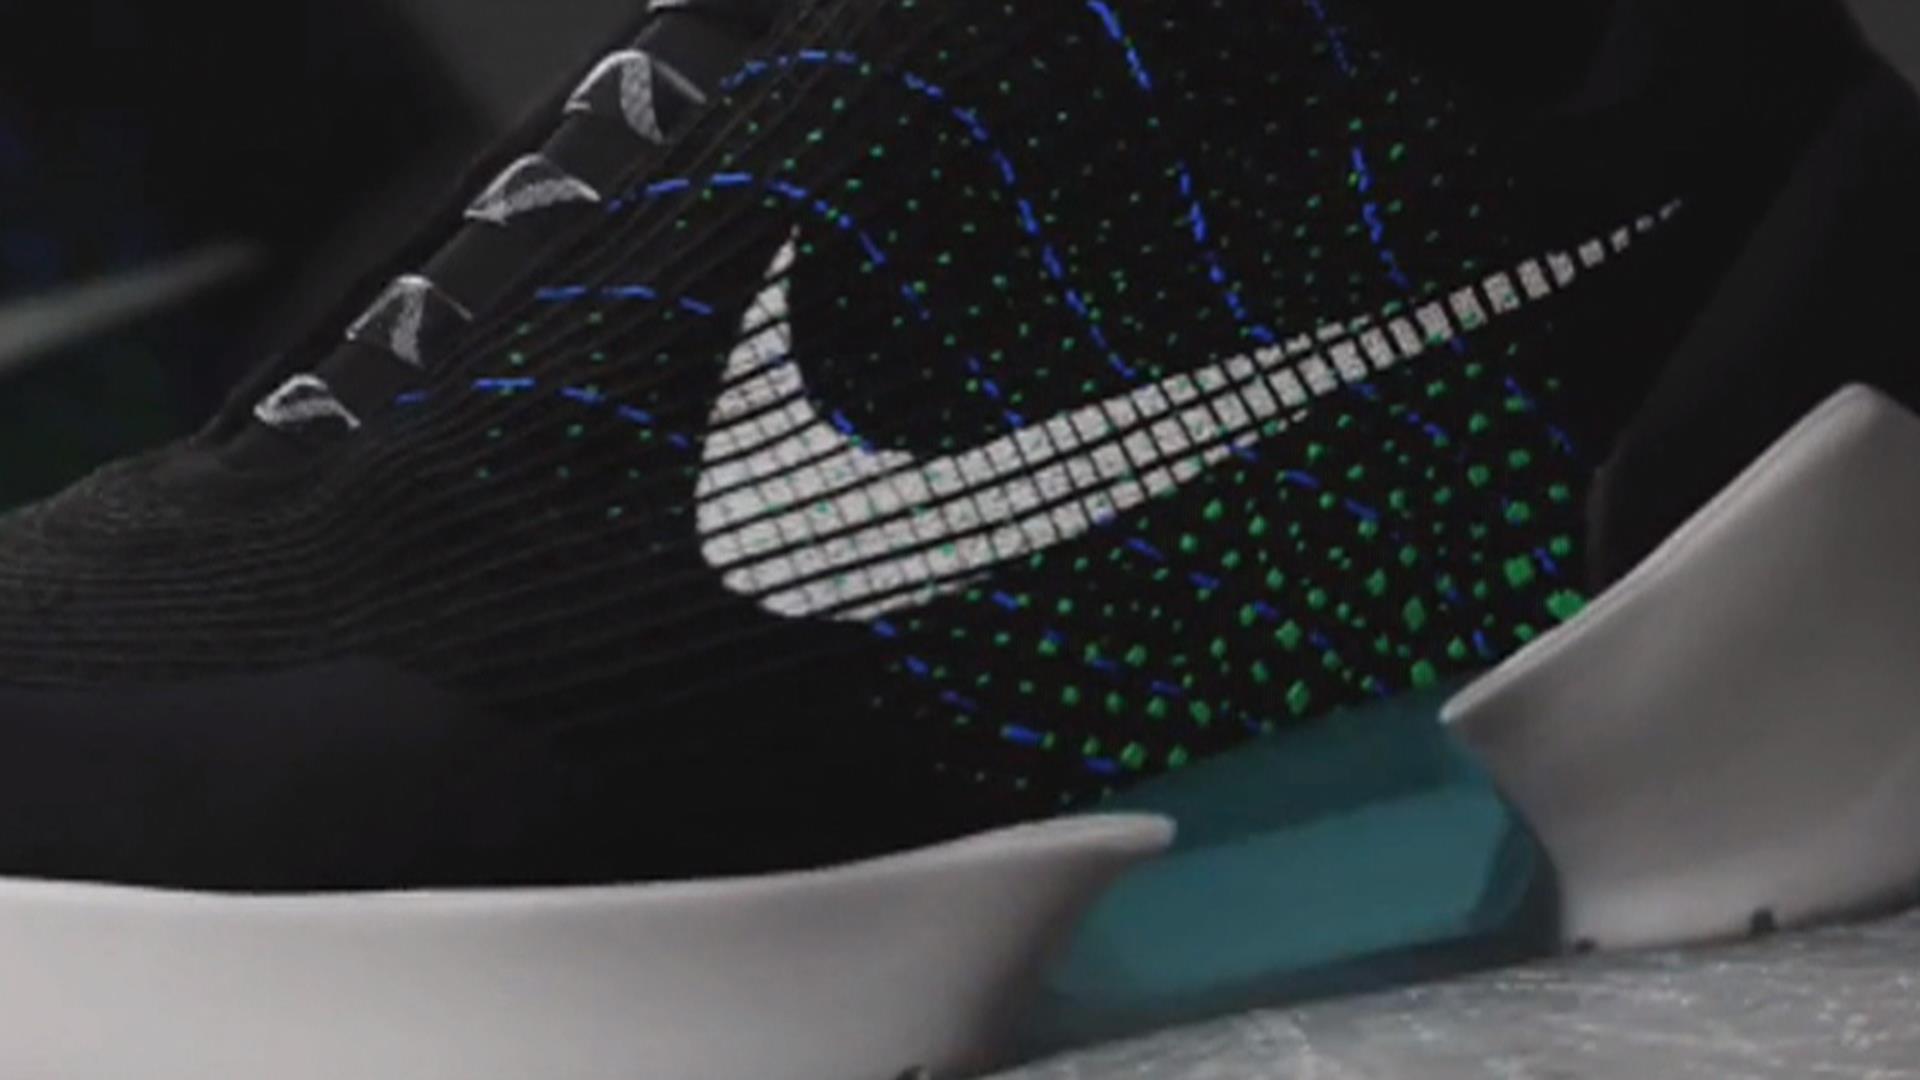 Nike unveils the first self-lacing shoes for holiday